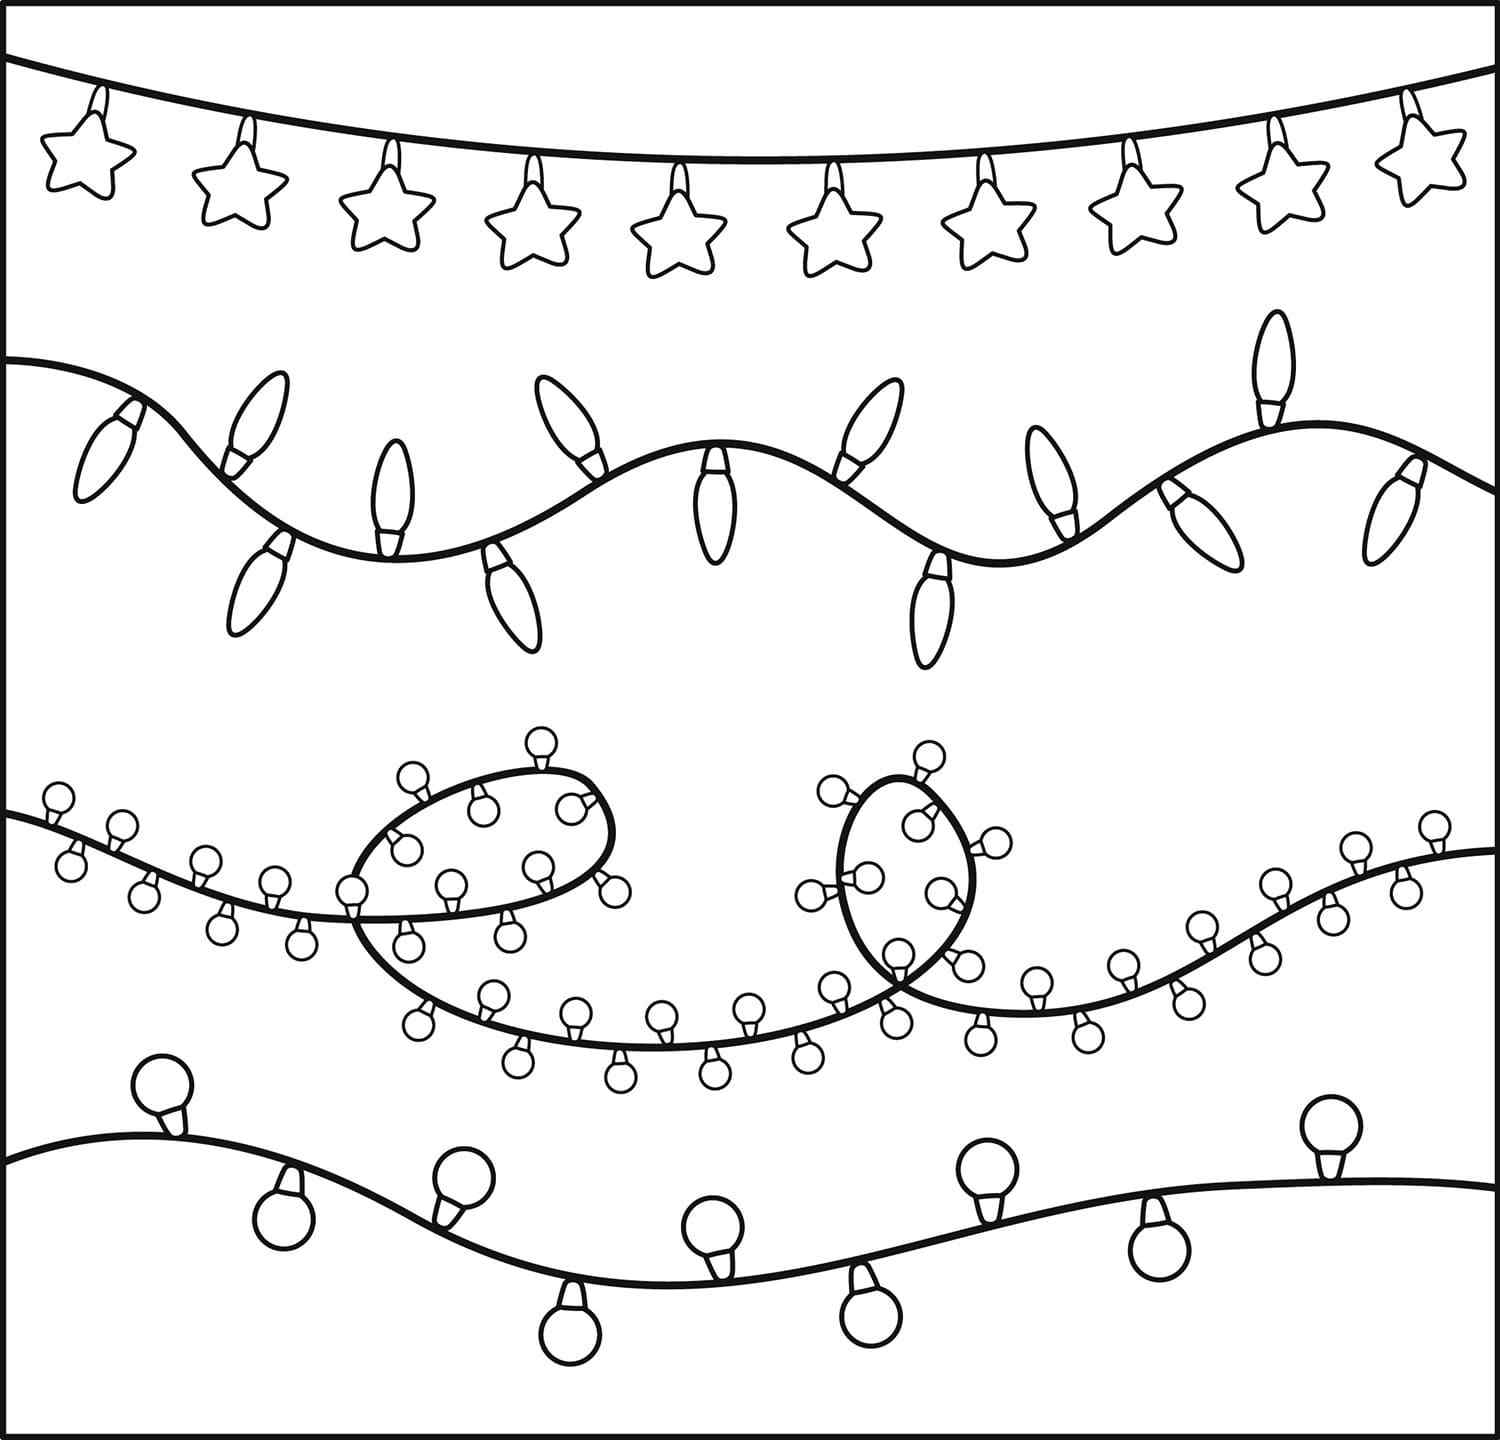 The Lights On The Garland Coloring Page